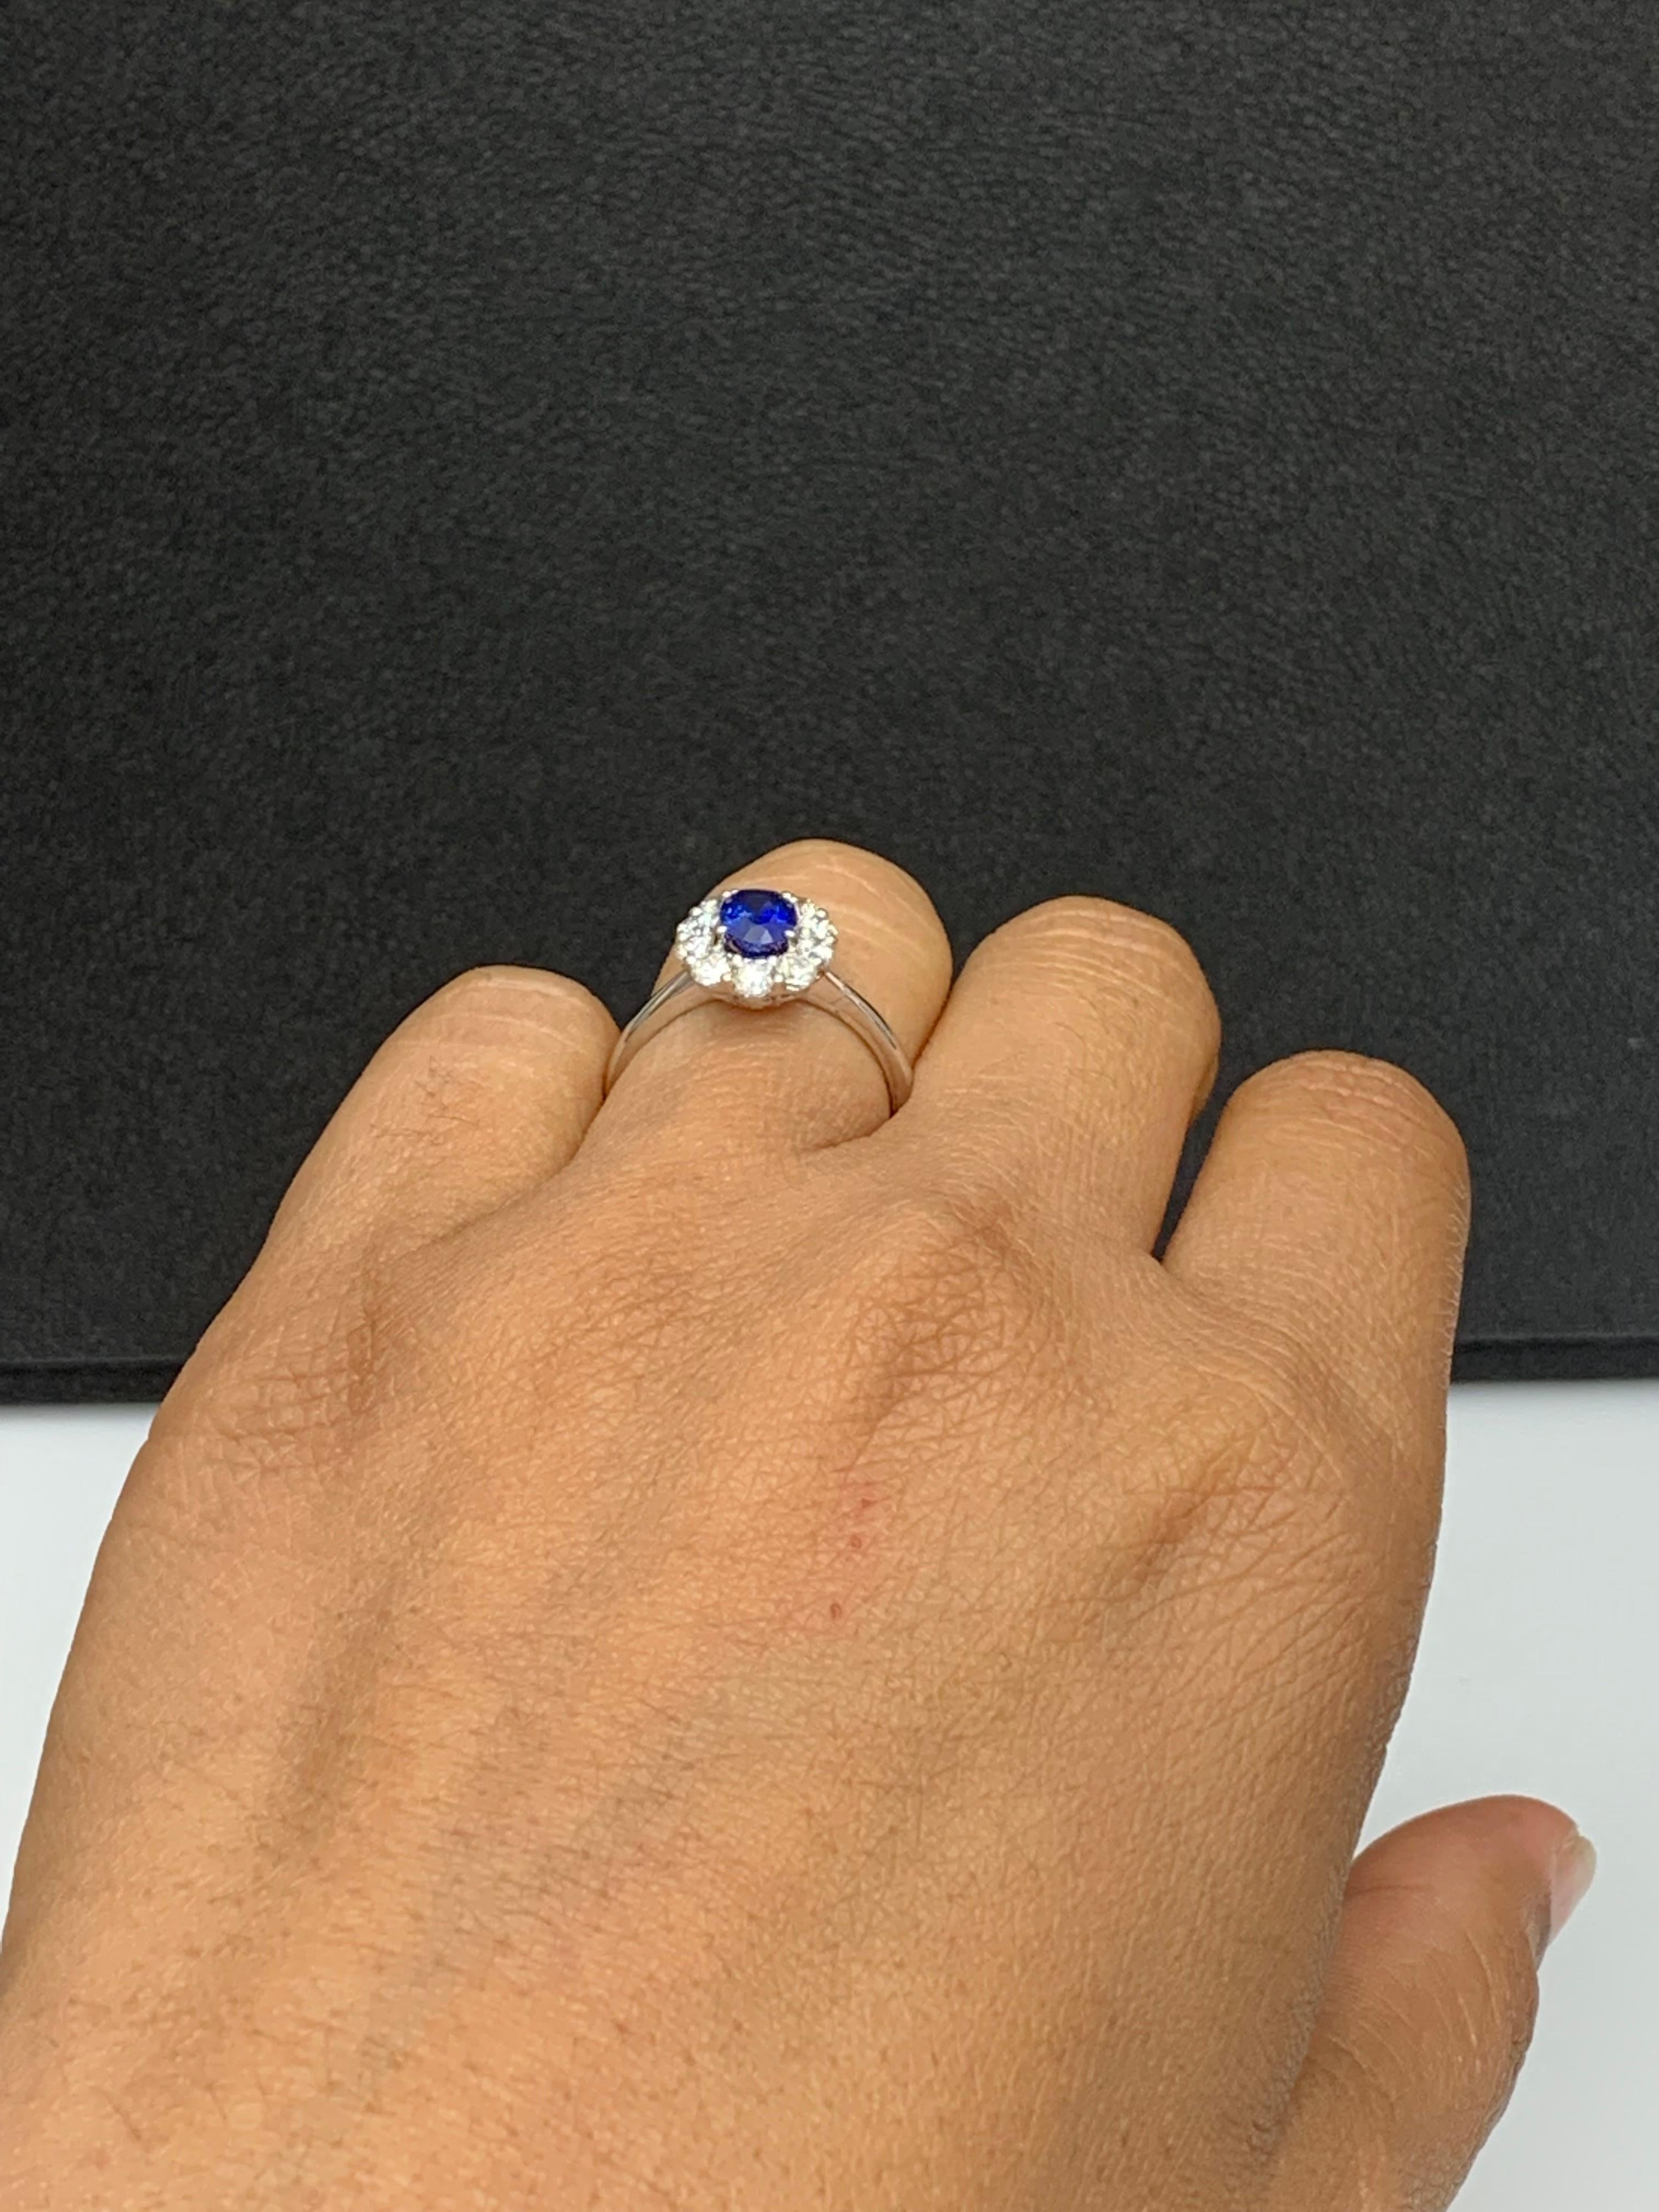 0.91 Carat Oval Cut Blue Sapphire and Diamond Ring in 18k White Gold For Sale 3